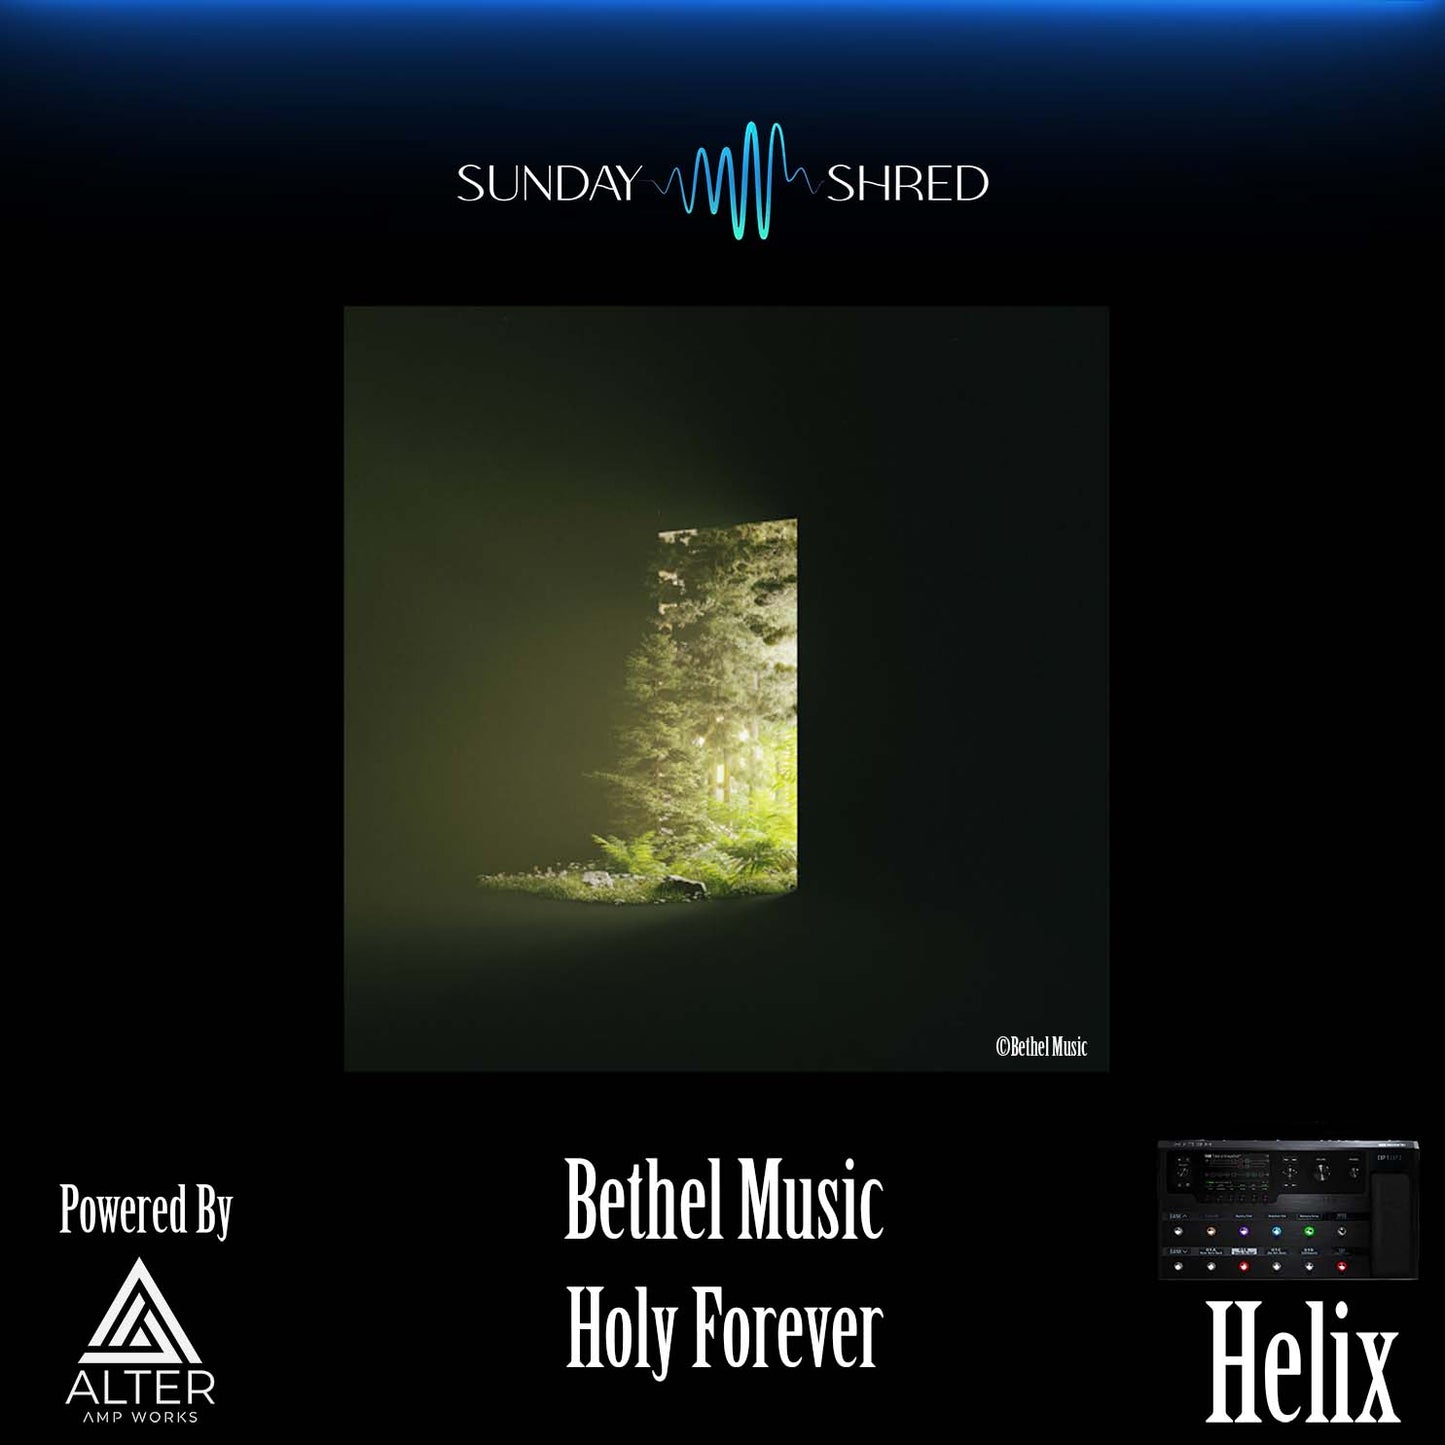 Holy Forever - Bethel - Helix Patch